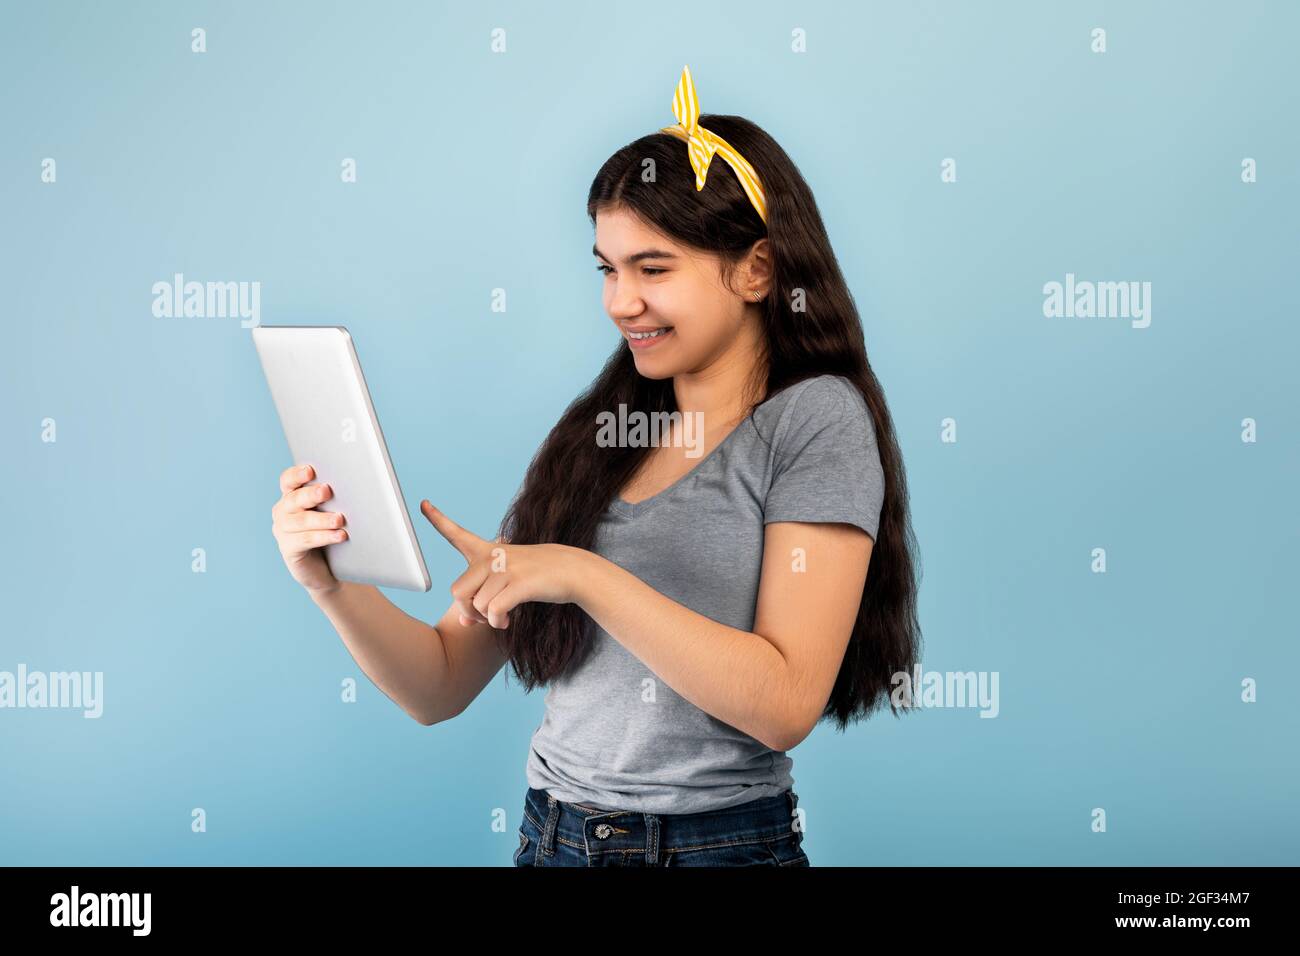 Portrait of cheery Indian teenage girl using modern tablet pc over blue studio background Stock Photo